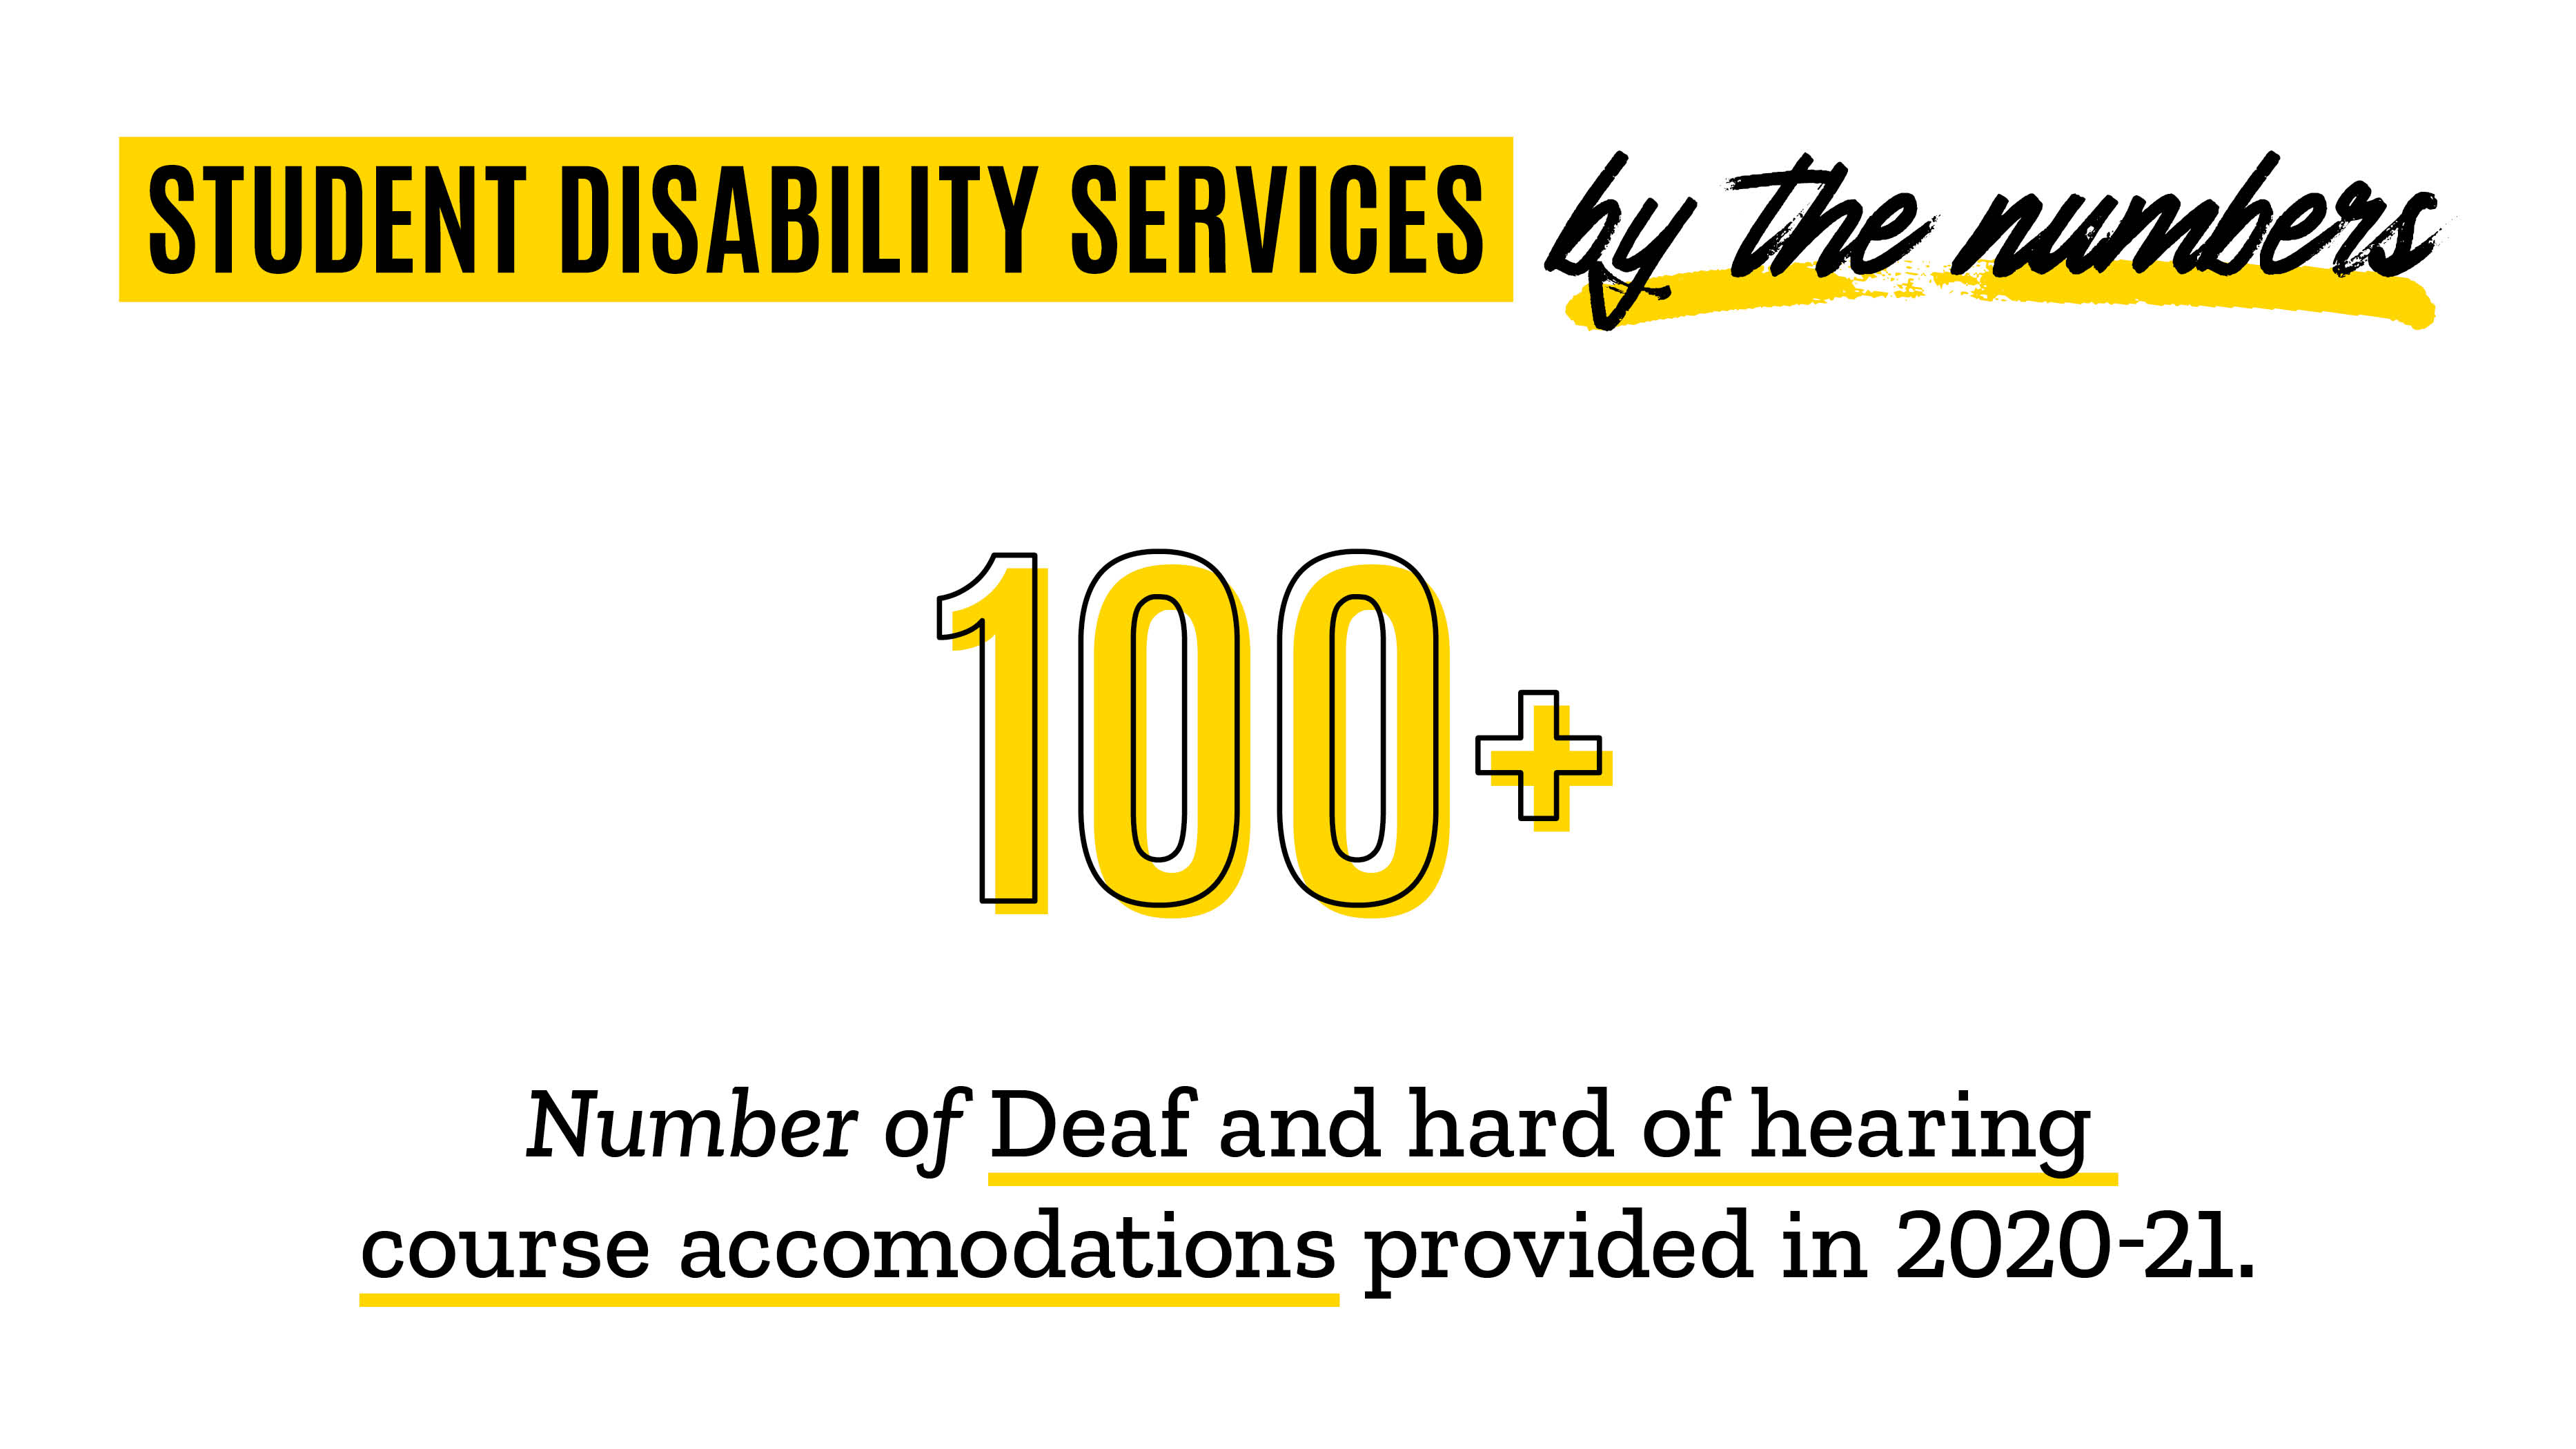 By the numbers 100+ number of Deaf and Hard of Hearing Course accommodations provided in 2020-21